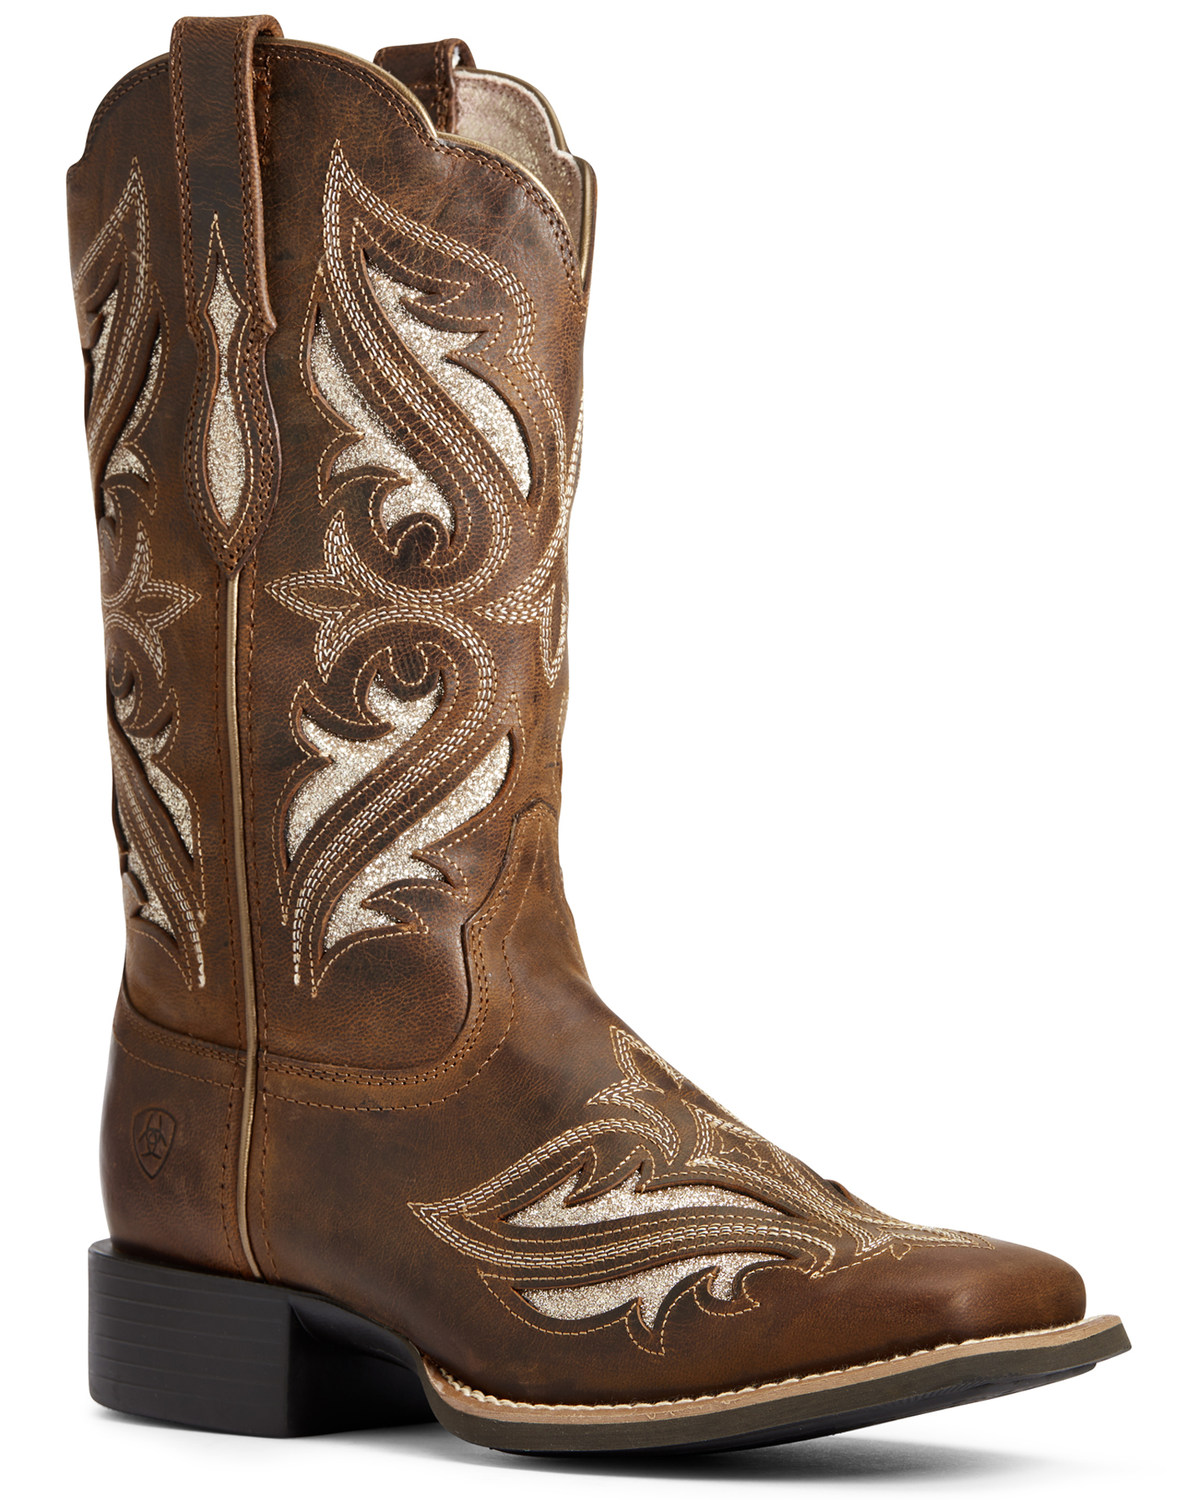 Ariat Women's Round Up Bliss Western Boots - Wide Square Toe